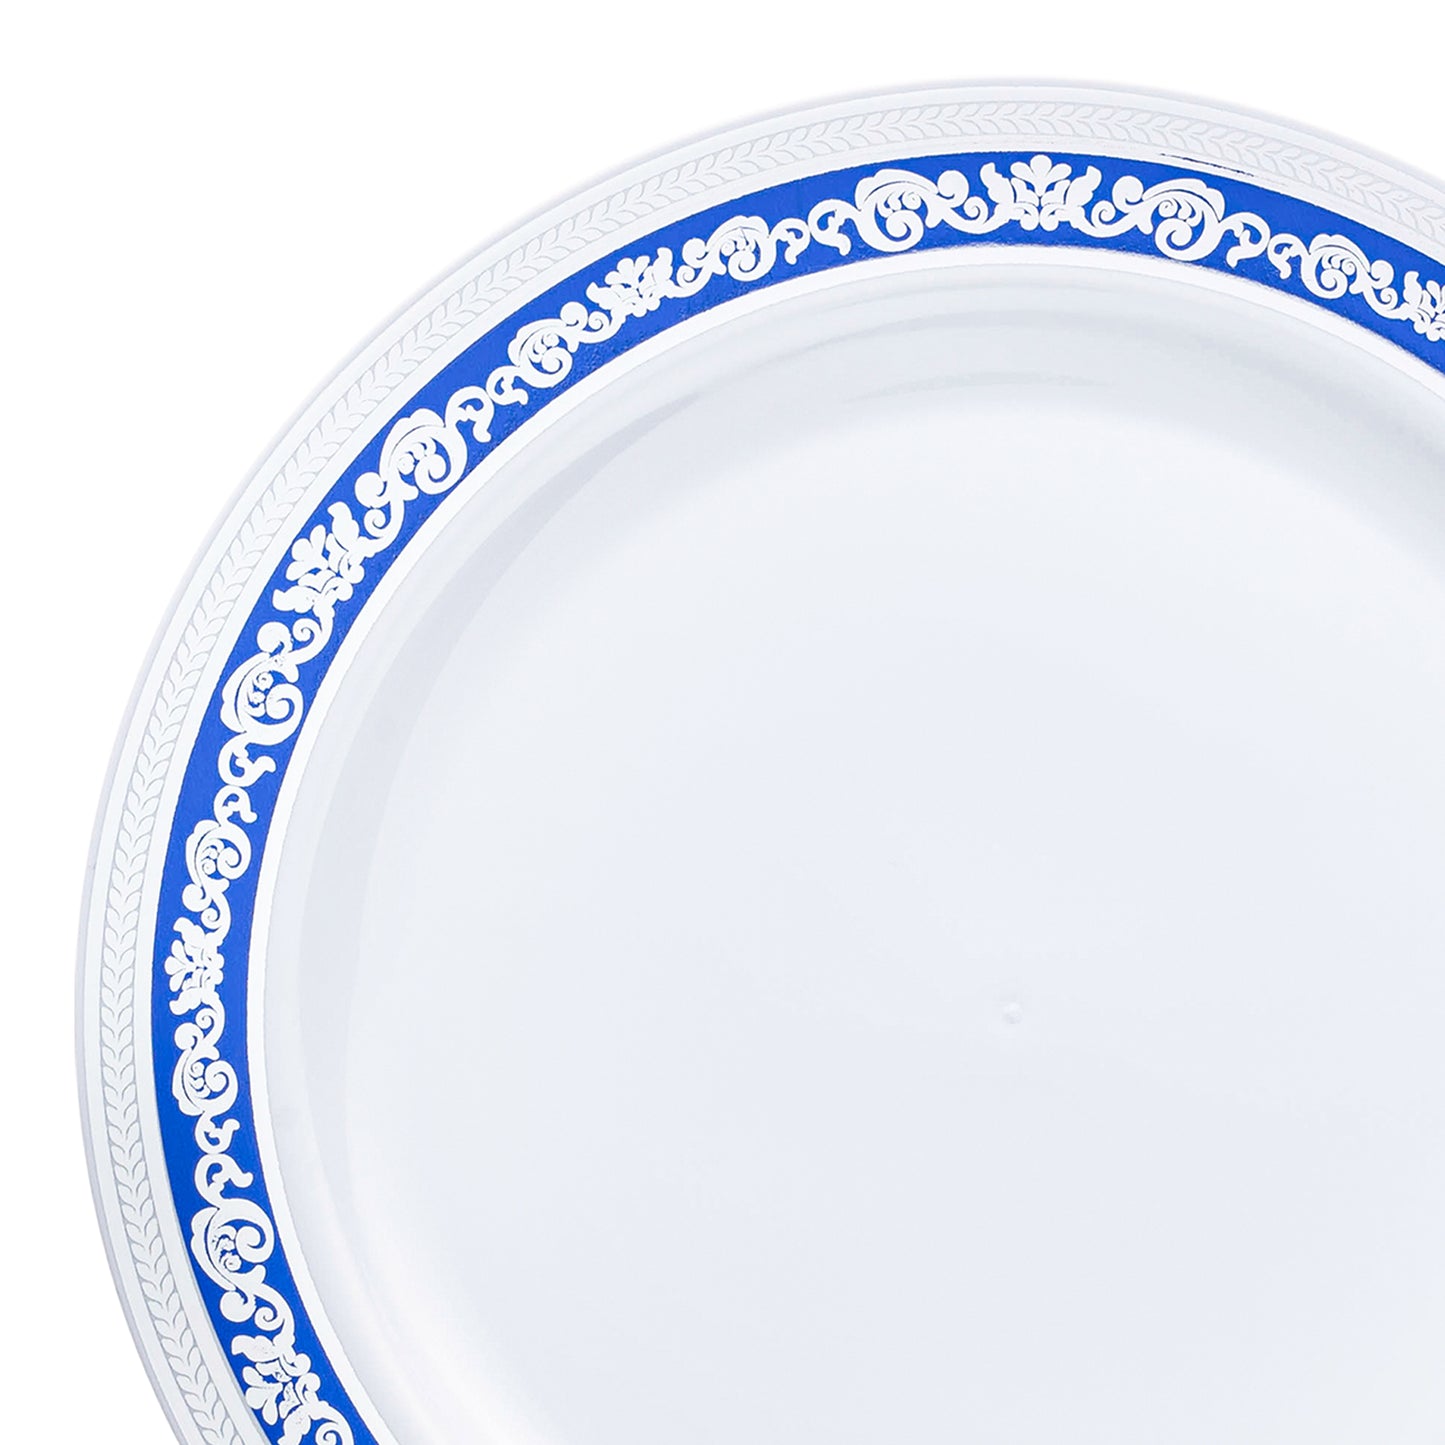 White with Blue and Silver Royal Rim Plastic Dinner Plates (10.25") | The Kaya Collection